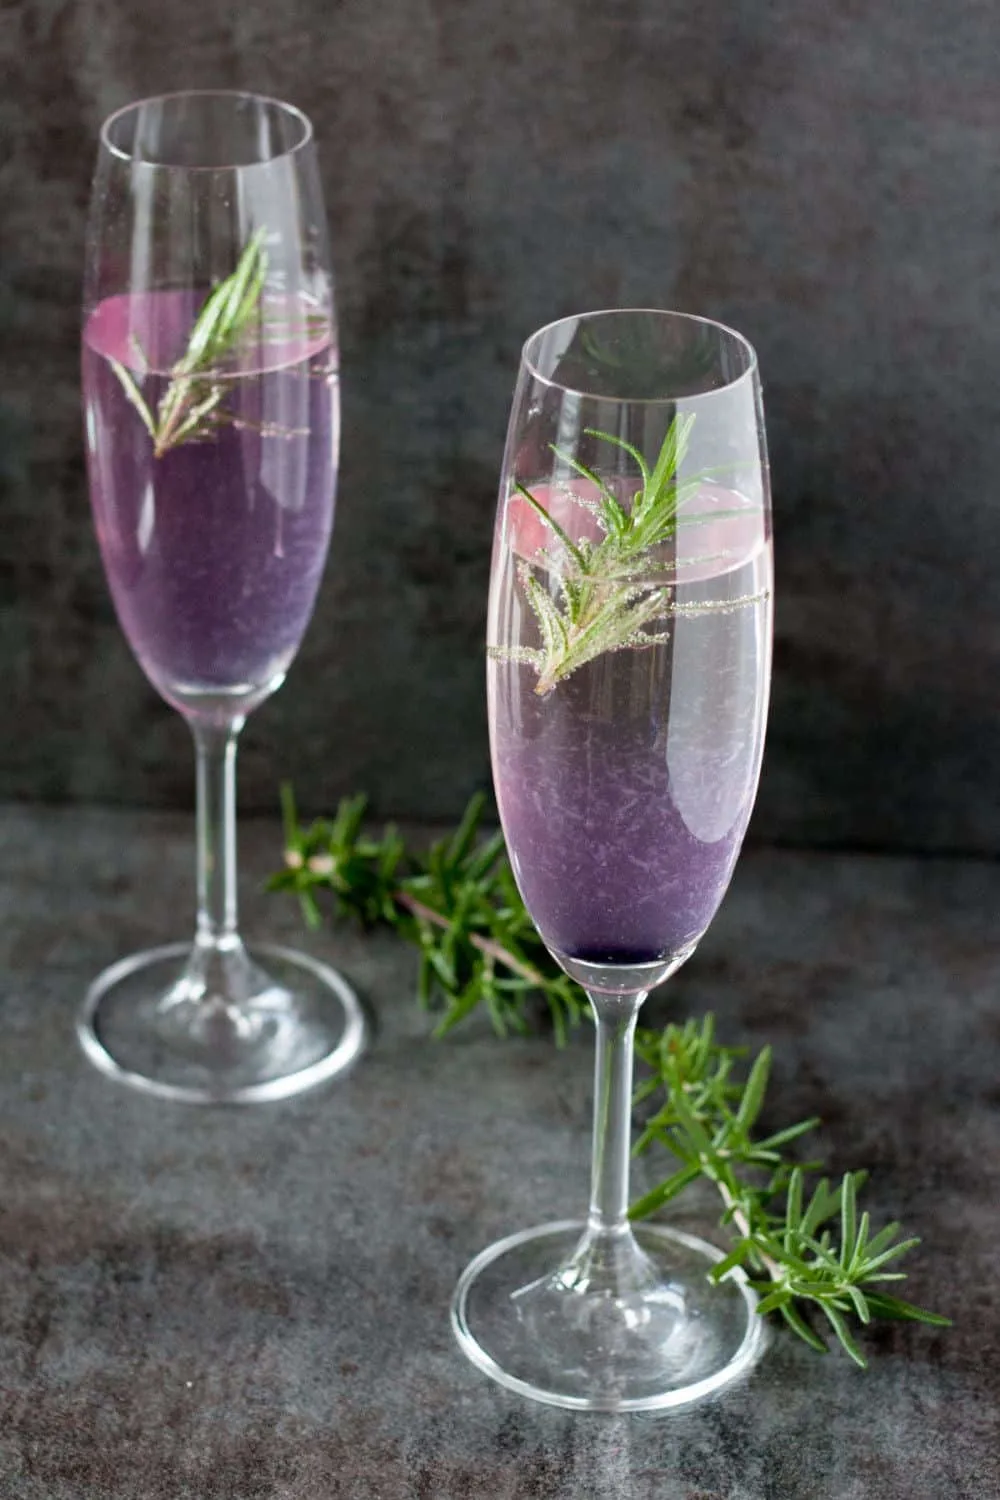 A refreshing New Year's Eve Cocktail! Get the color changing Rosemary 75 champagne cocktail recipe on GoodieGodmother.com